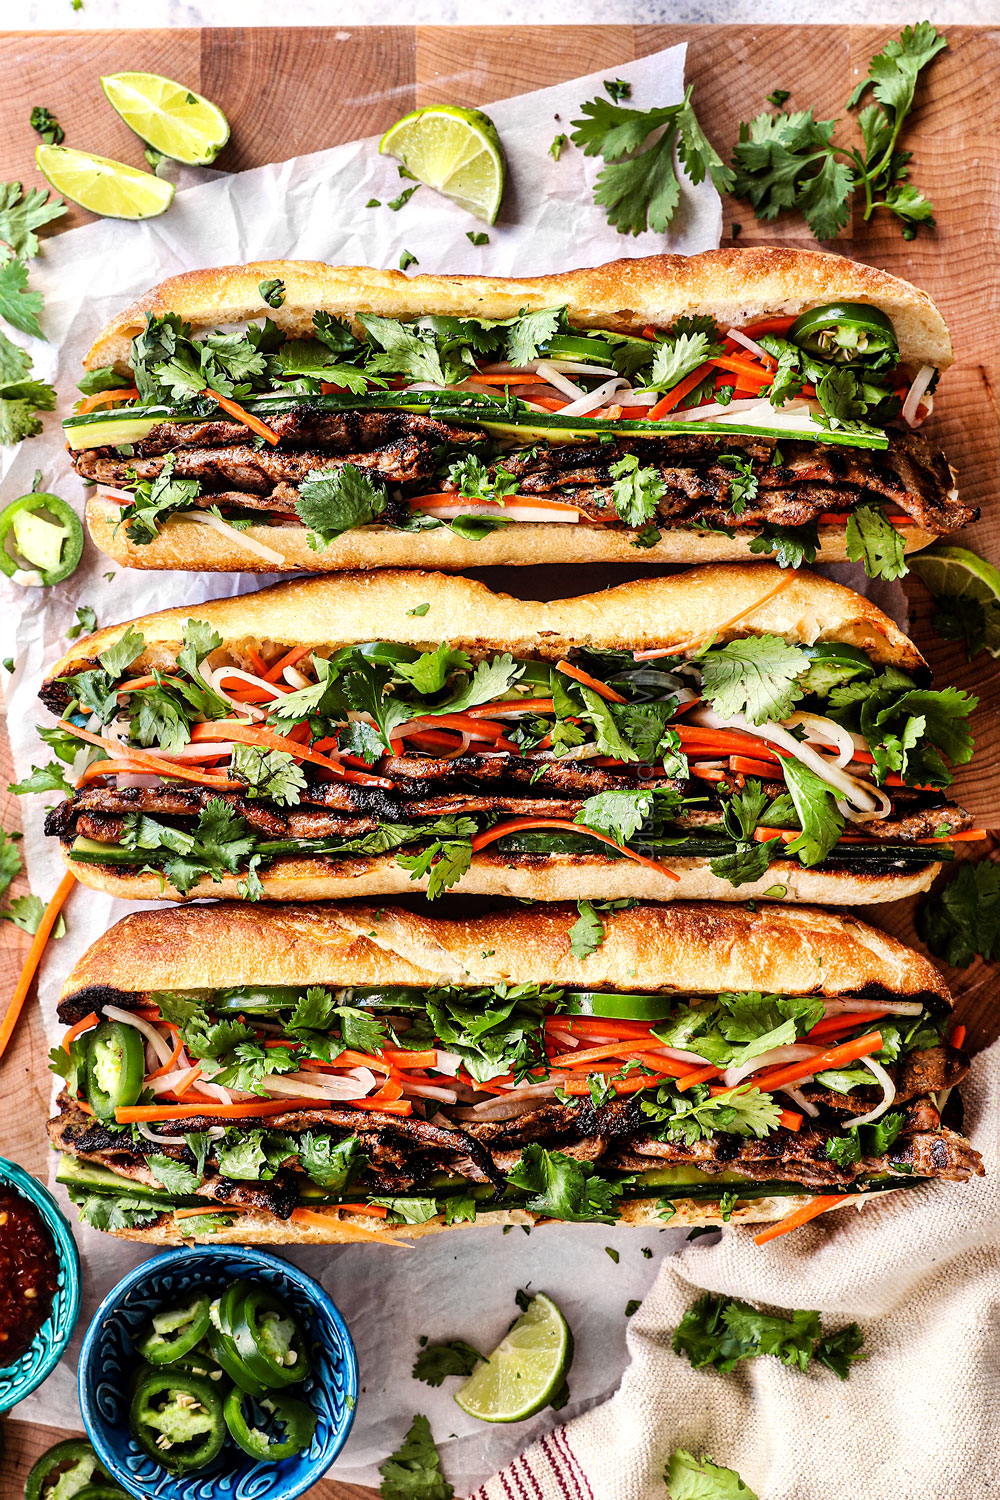 banh mi sandwich recipe lined on a cutting board showing which bread to use for the Vietnamese sandwiches